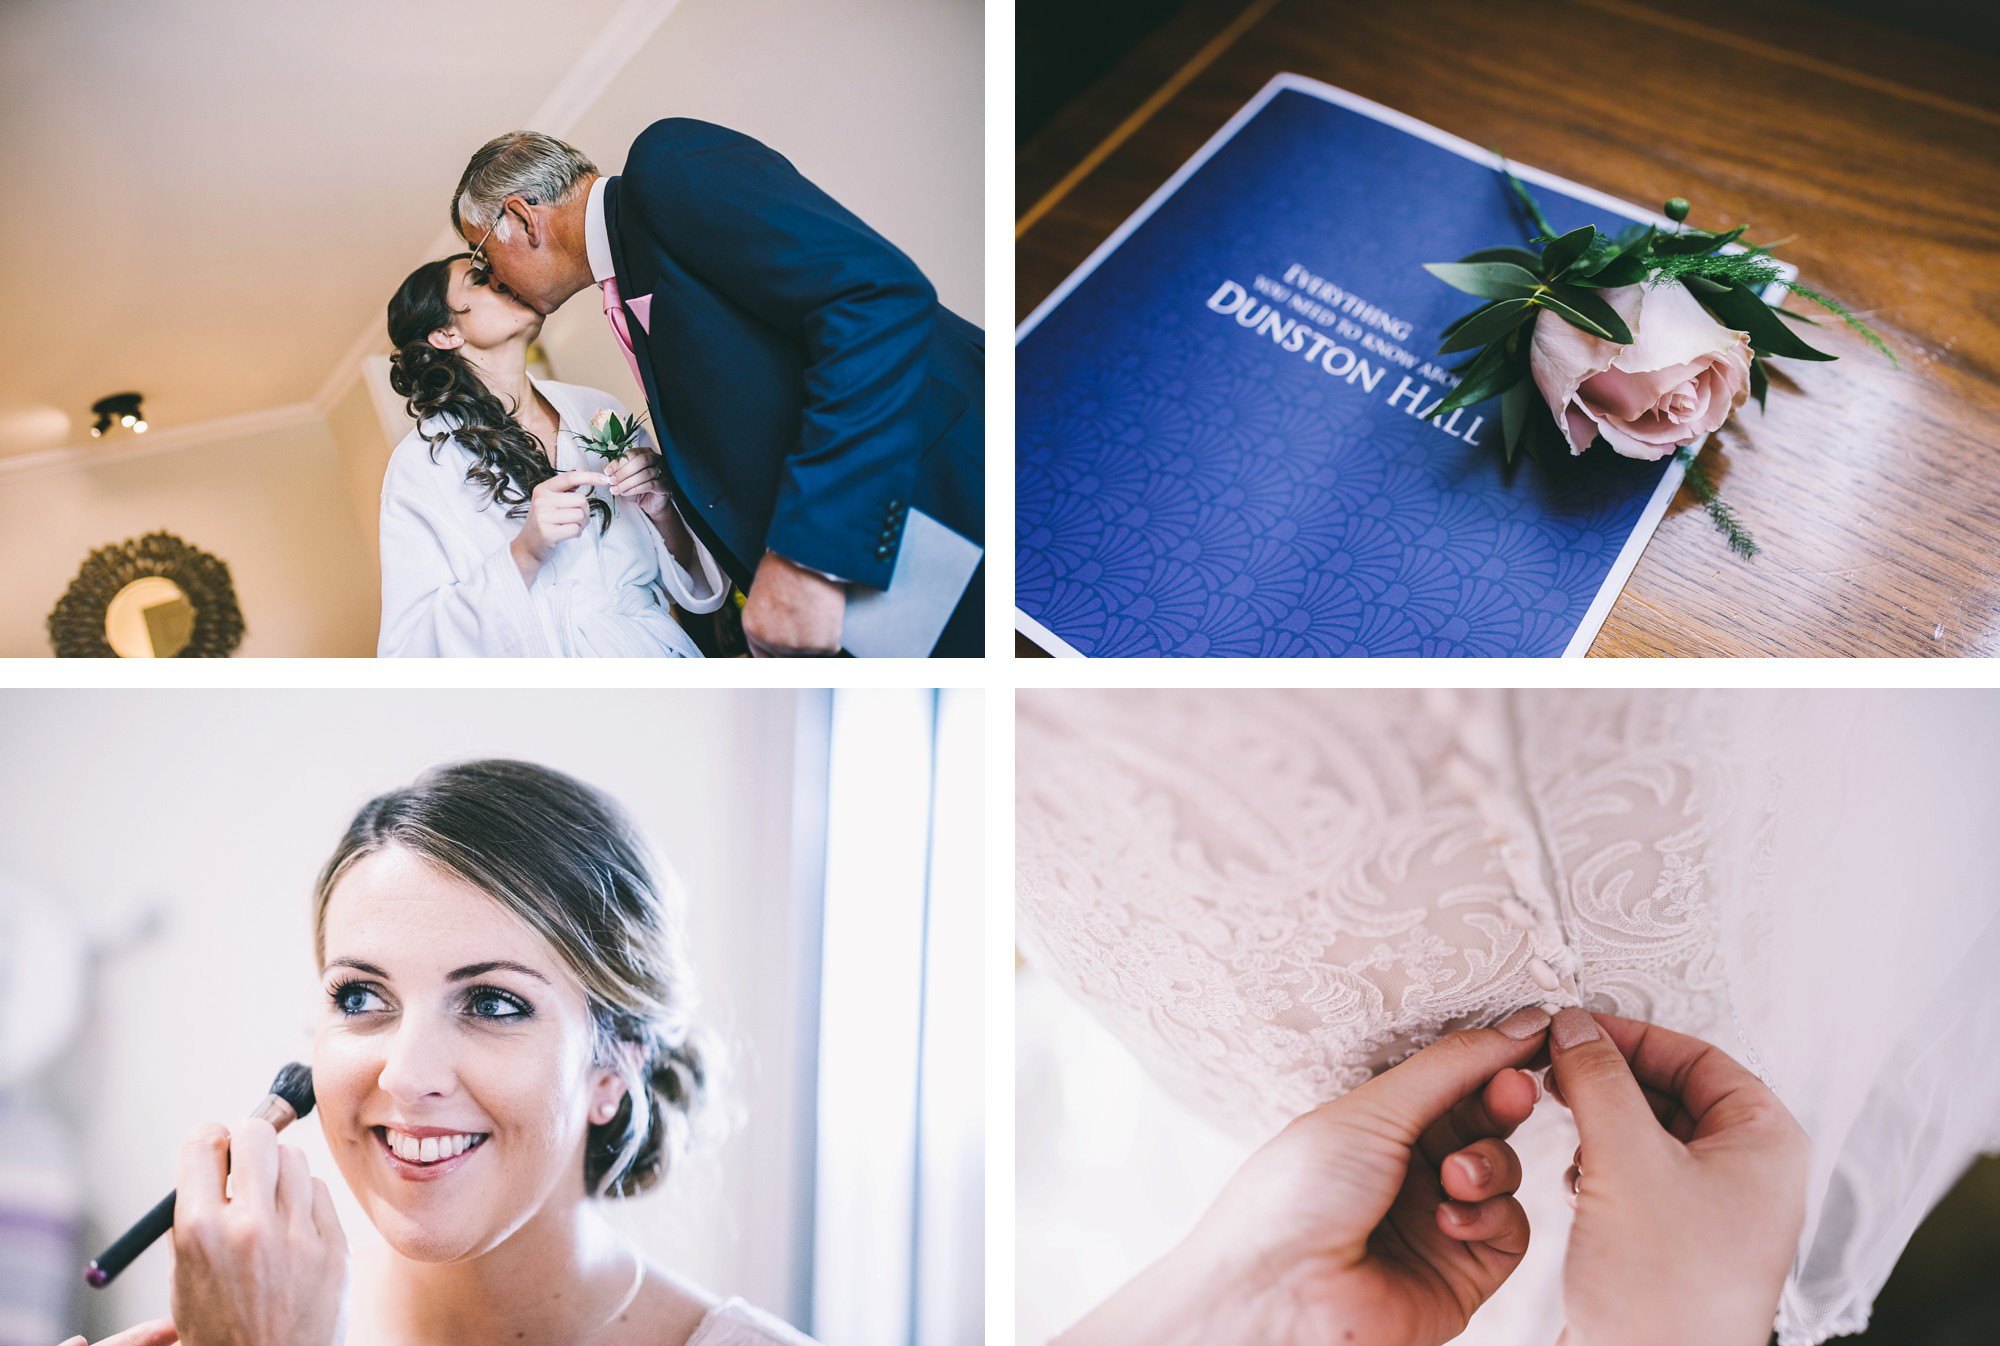 dunston-hall-wedding-in-norwich-james-powell-photography-007